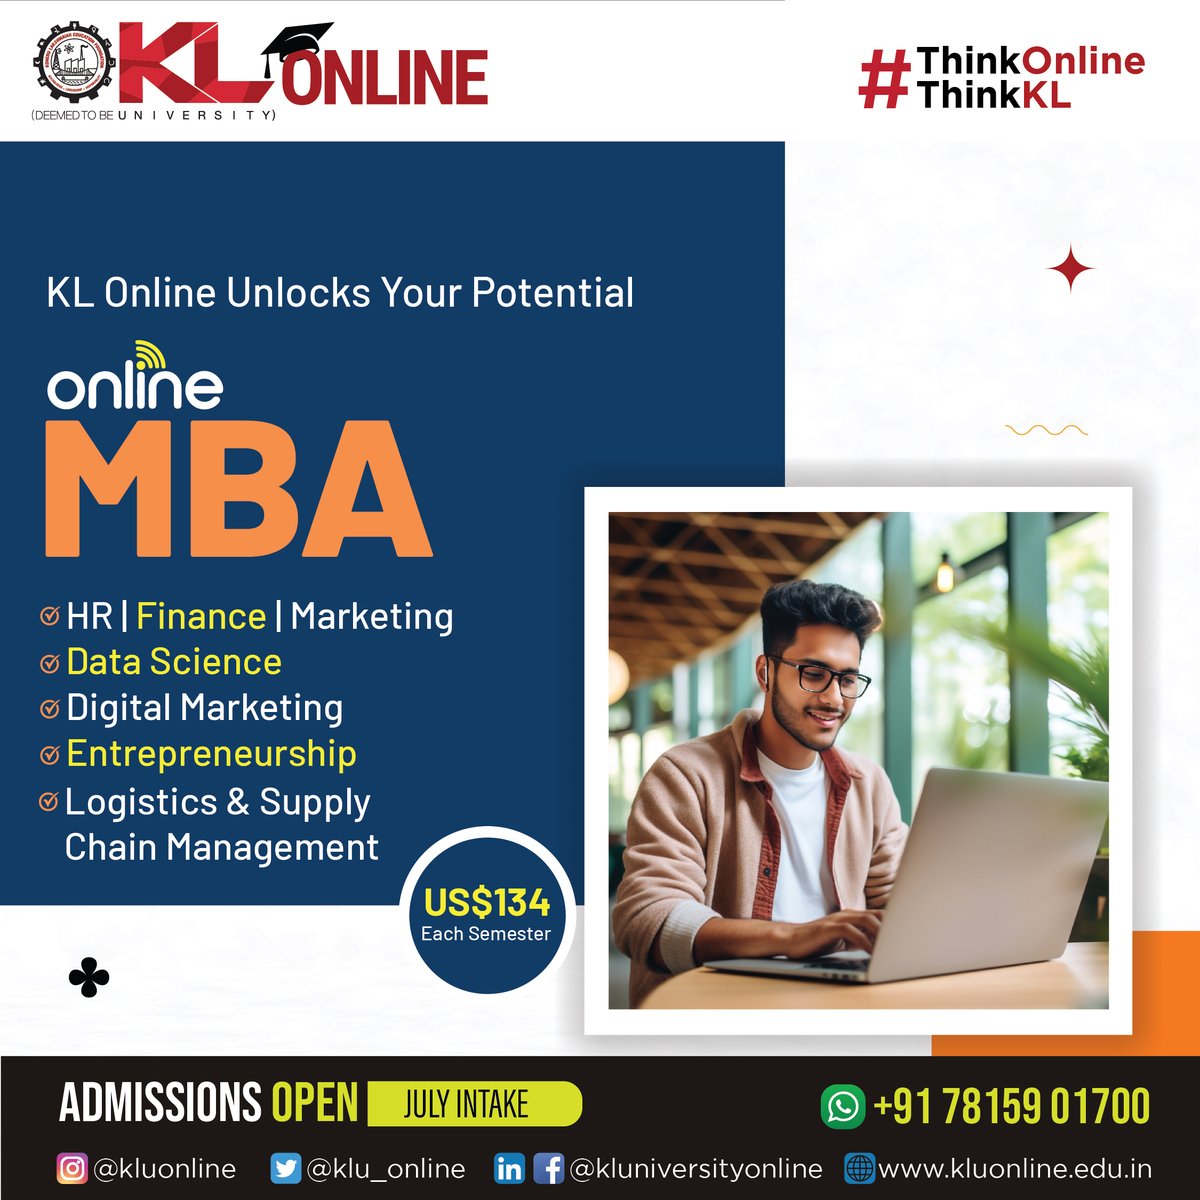 Among non-technical courses, business administration is one of the most popular options. Enroll in an MBA at KL Online, which has 44 years of experience imparting quality education.

Admissions open

#KLOnline #KLUniversity #Onlinedegree #onlinelearning #OnlineMBA #pgcourses